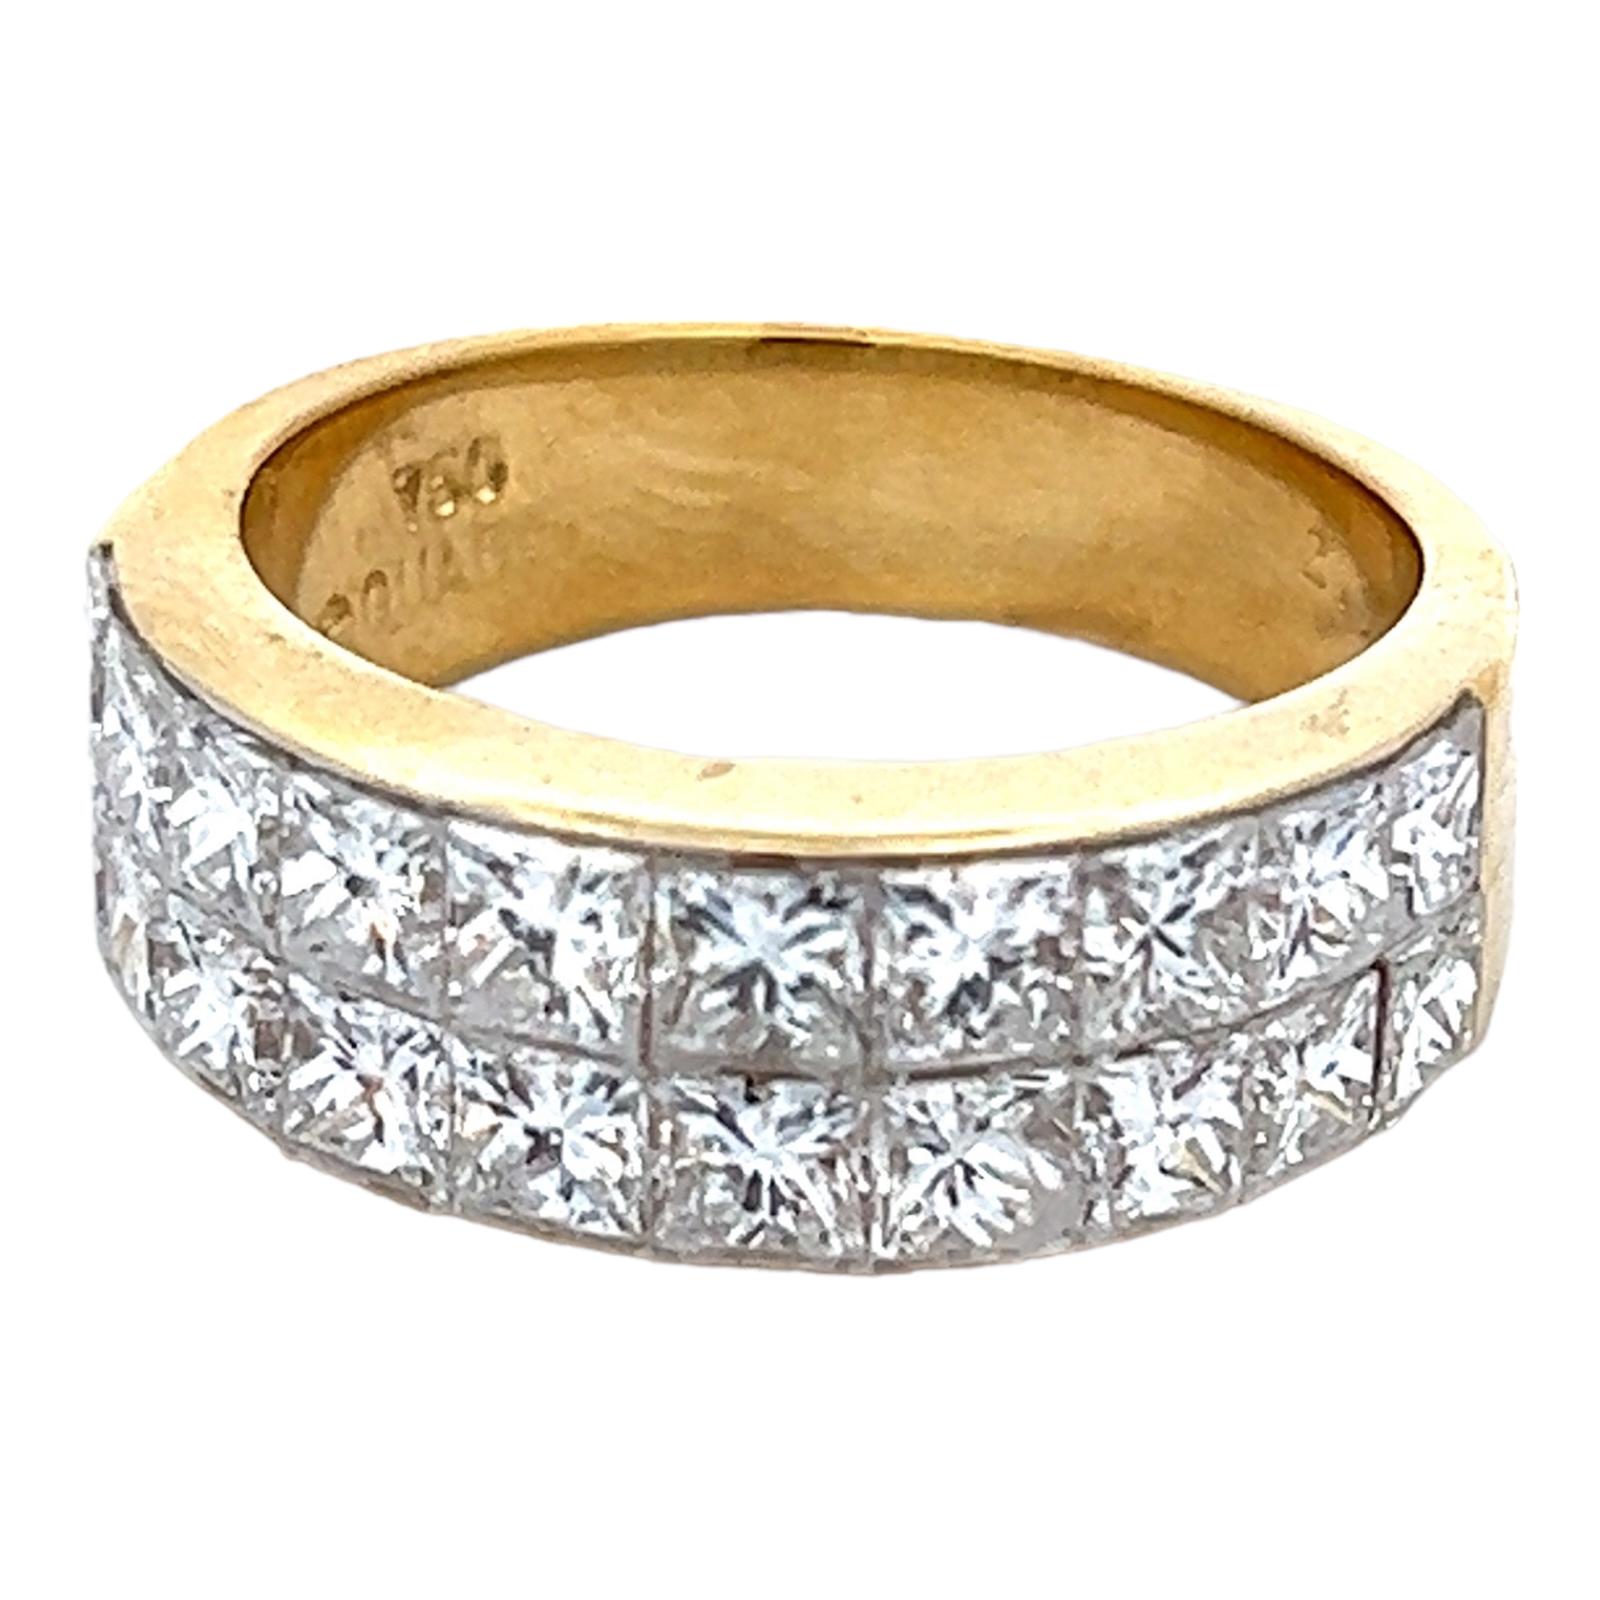 Invisibly set diamond wedding band fashioned in 18 karat yellow gold. The band features 2 rows of 20 princess cut diamonds weighing 2.60 carat total weight. The diamonds are graded G-H color and VS-SI1 clarity. The band measures 7mm in width and is